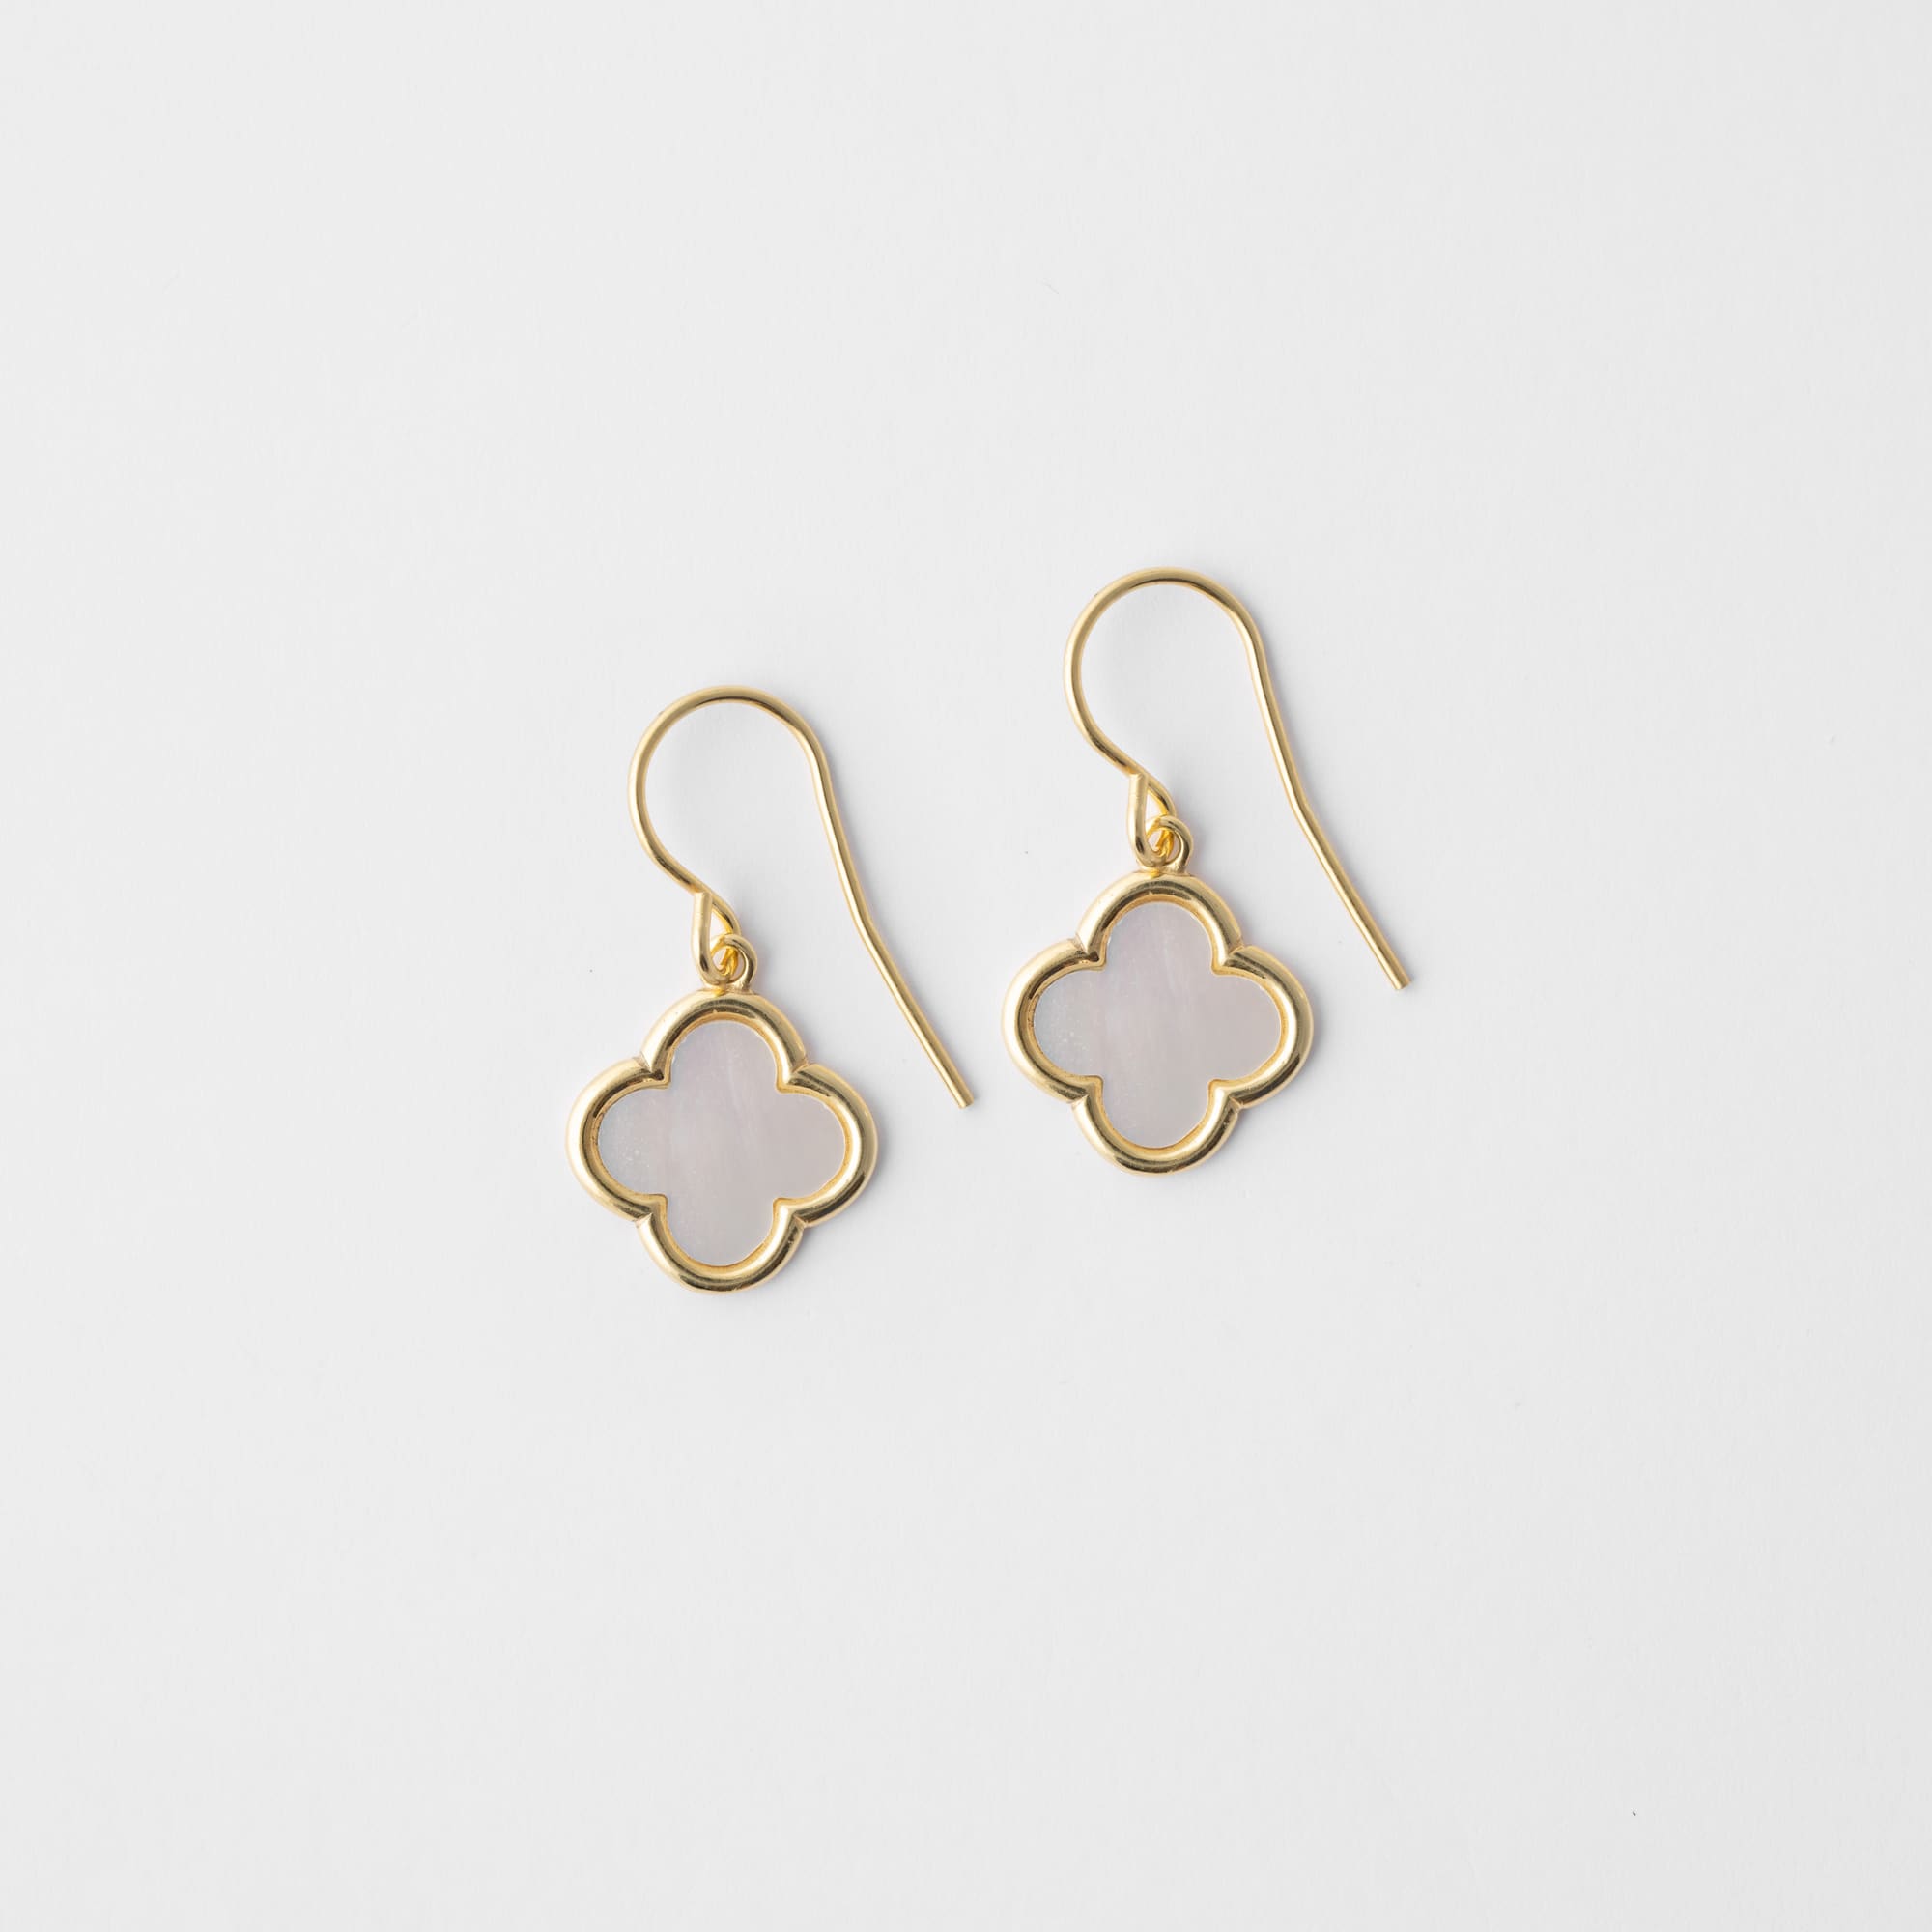 CLOVERLEAF Gold Earrings with Mother of Pearl